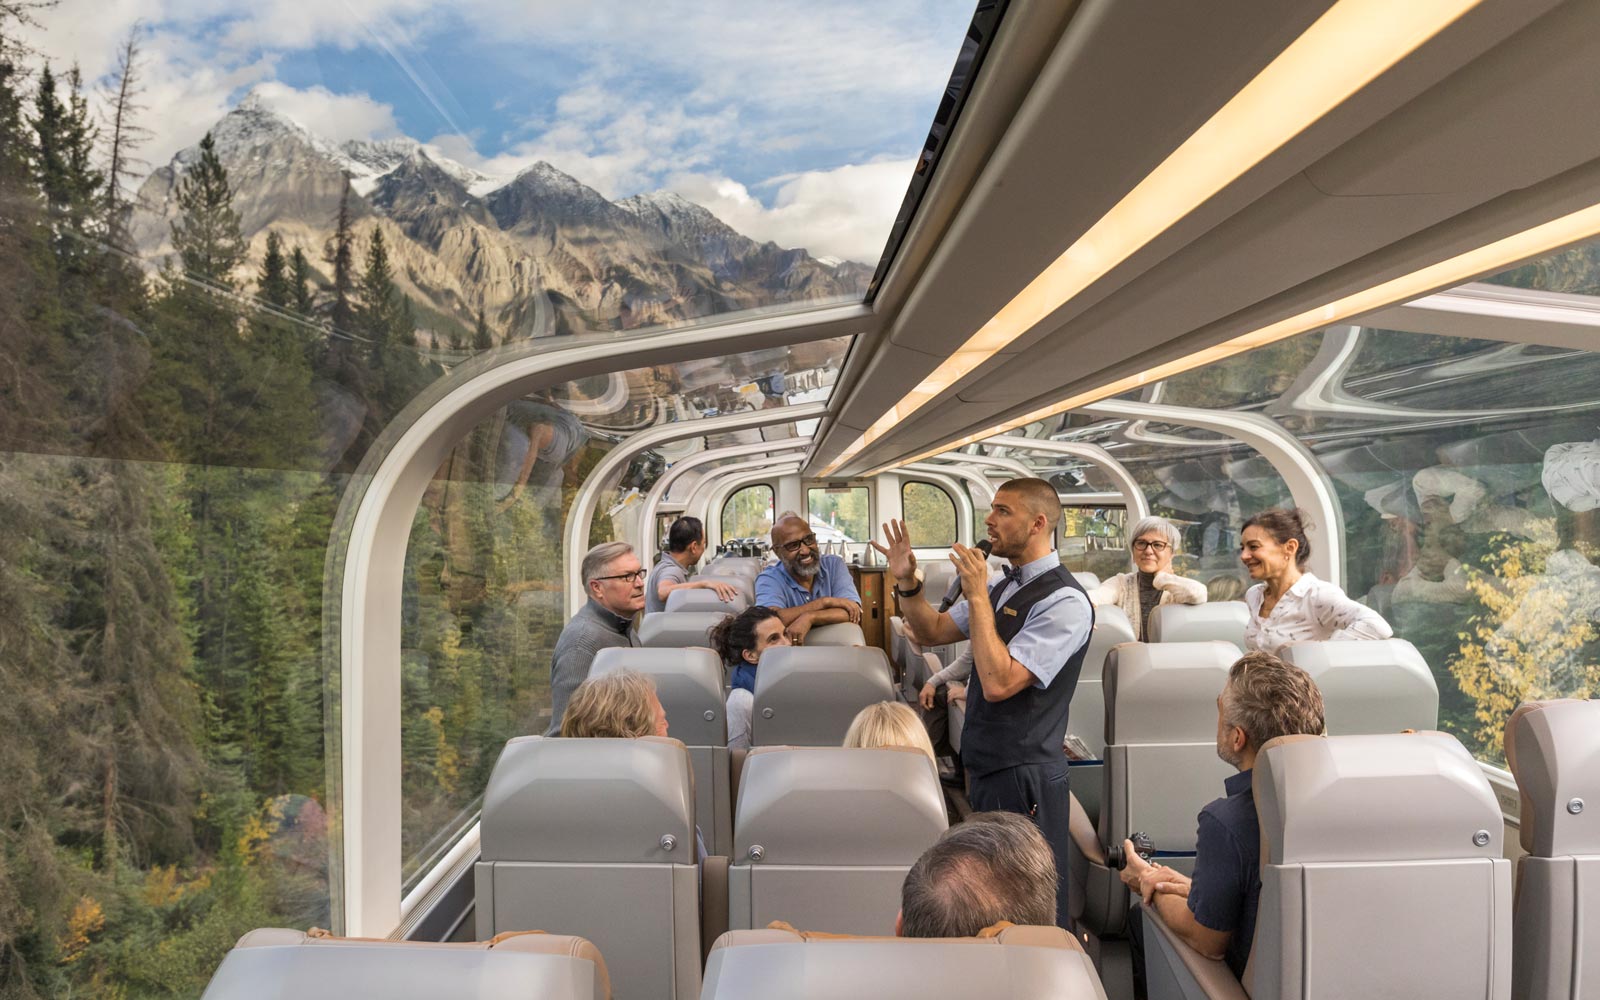 This glassdomed train promises you an ultimate ride through the